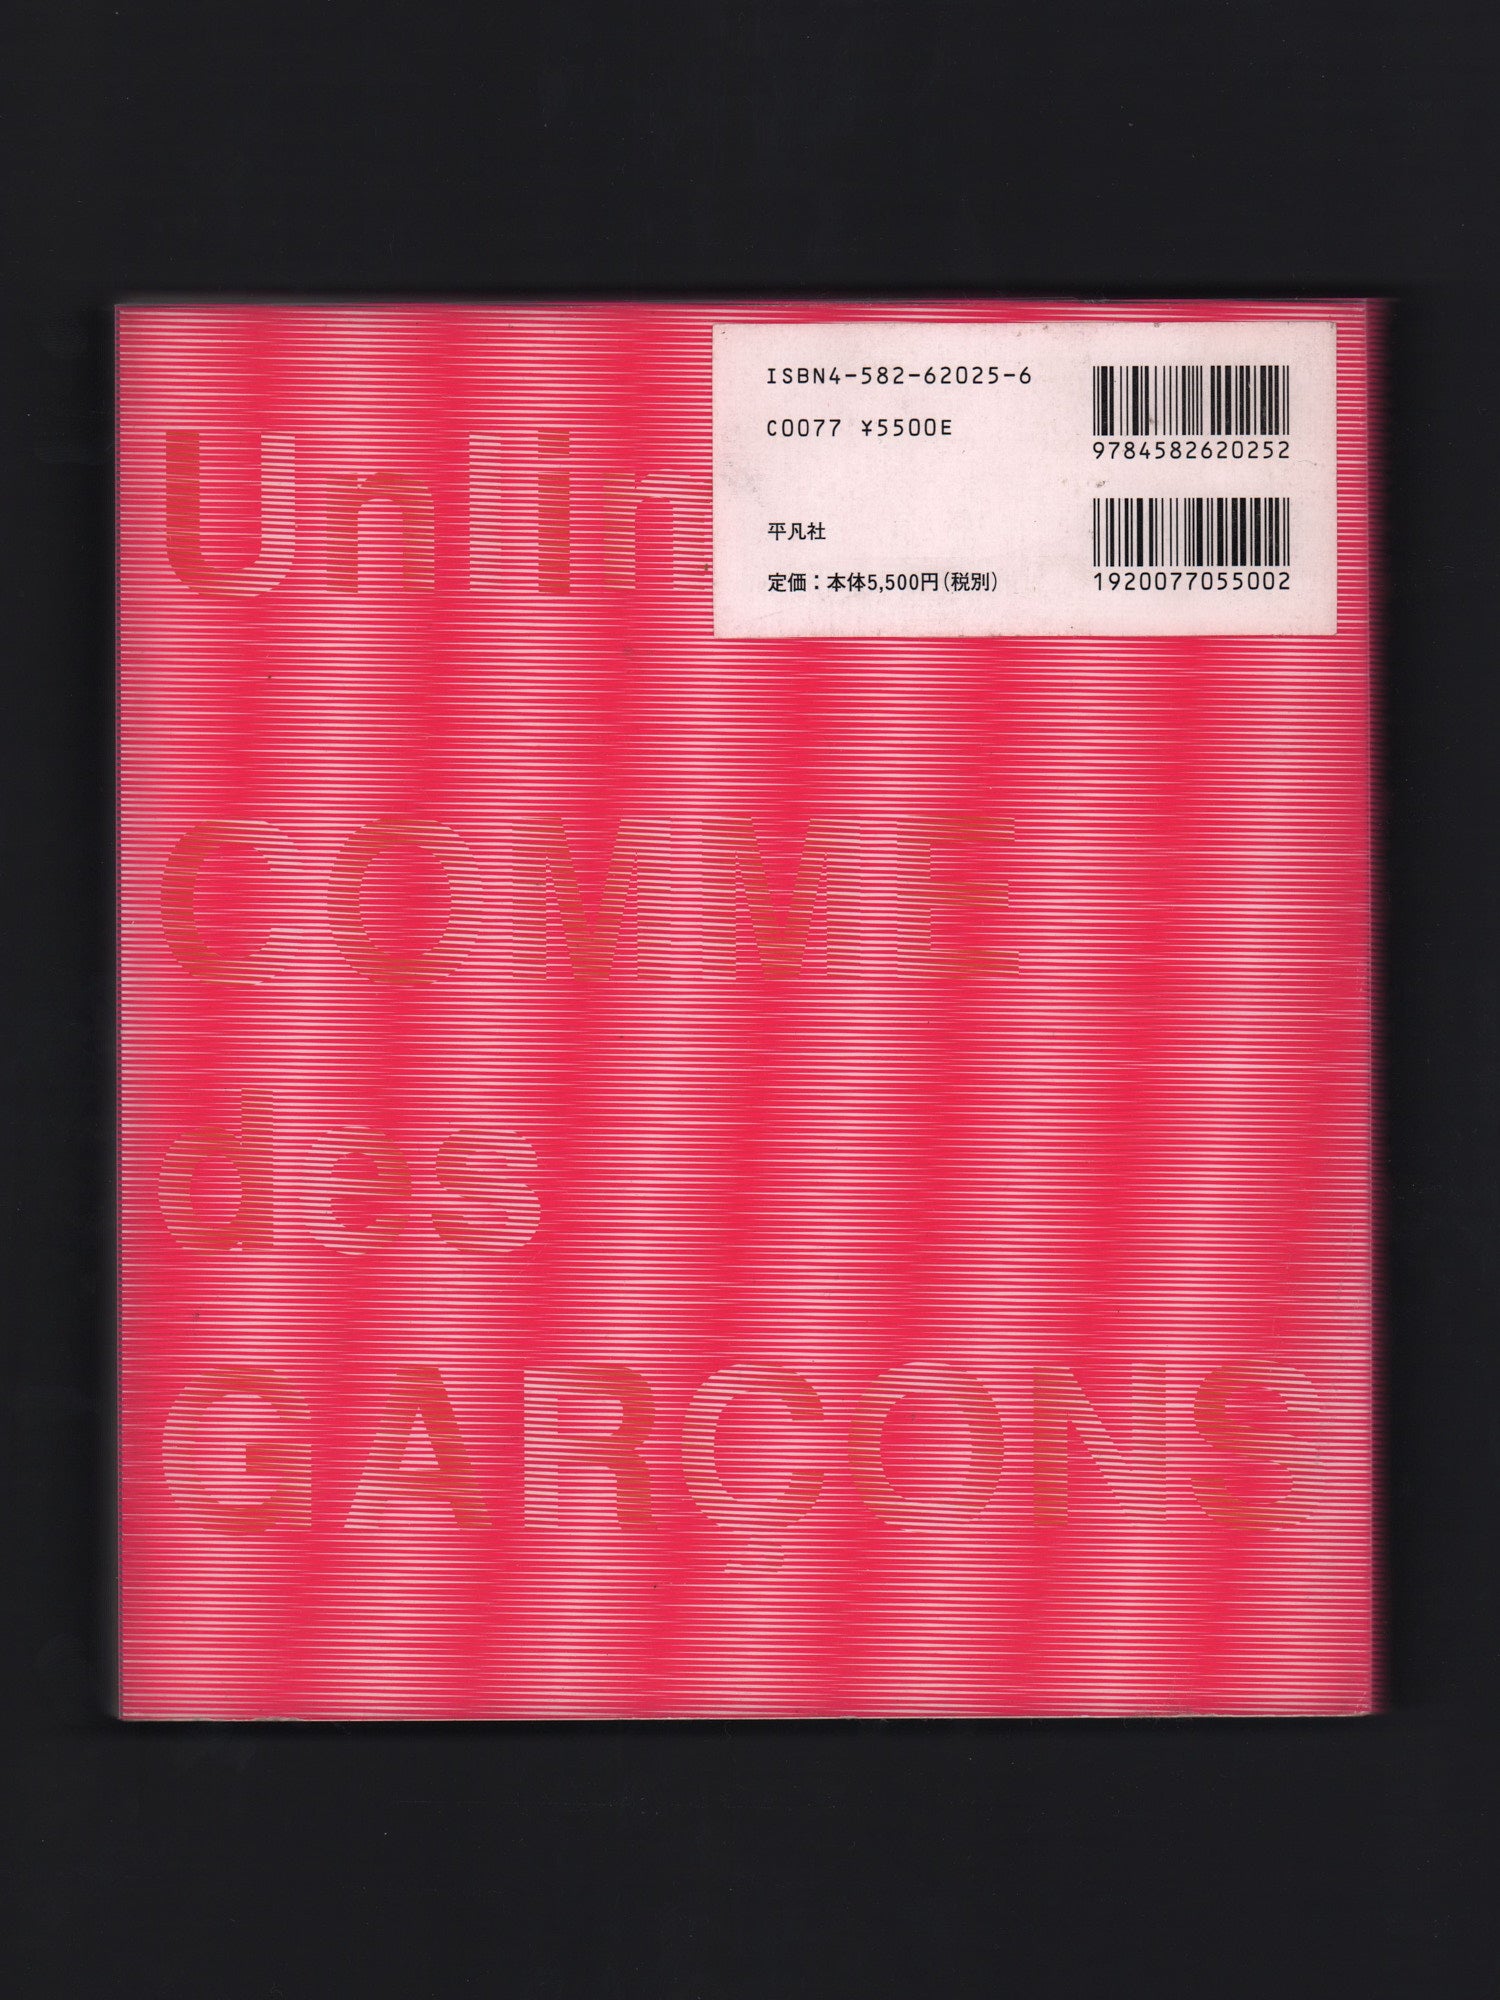 Unlimited: Comme des Garcons (2005) - edited by Sanae Shimizu and NHK